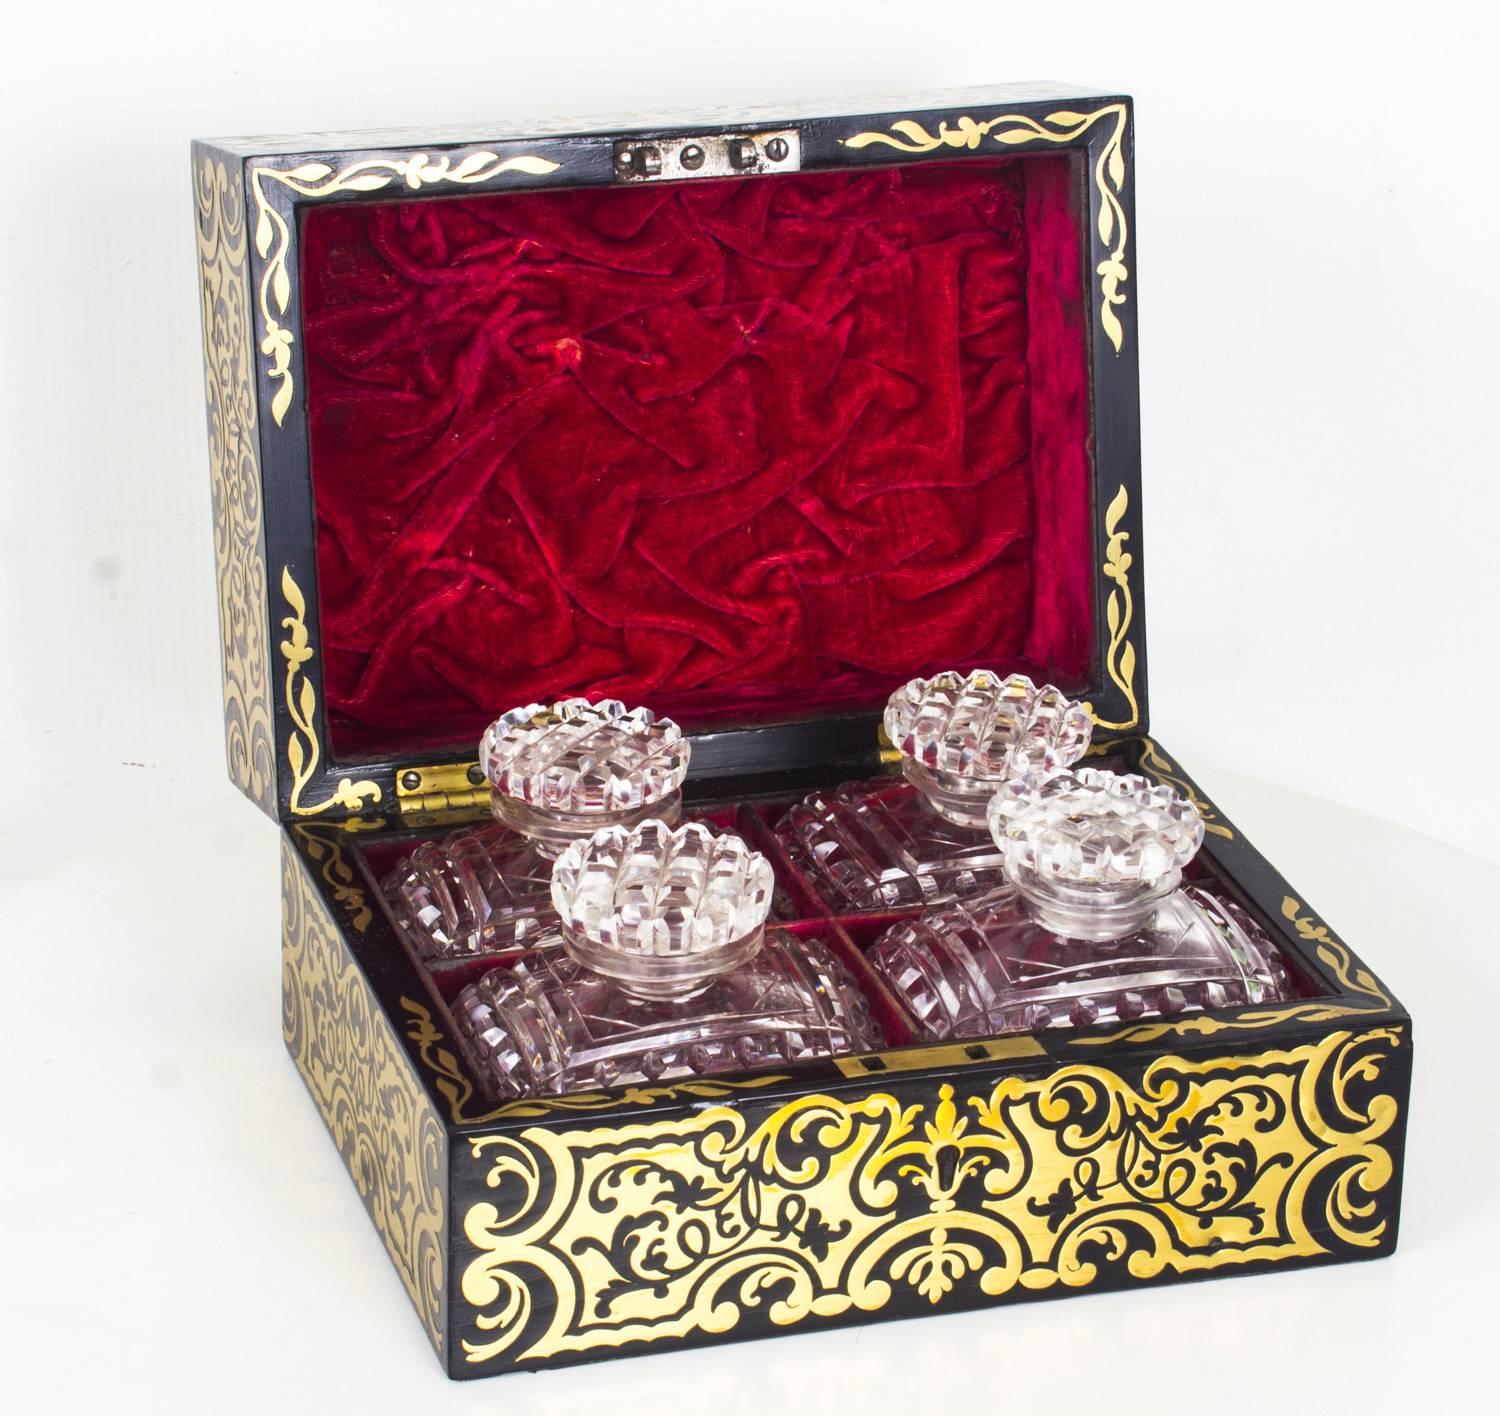 This is a fine antique French ebonised cut brass Boulle travelling dressing table box with four cut glass perfume bottles, circa 1860 in date.

The rectangular box is decorated with delicately cut brass foliate, scroll and strapwork decoration